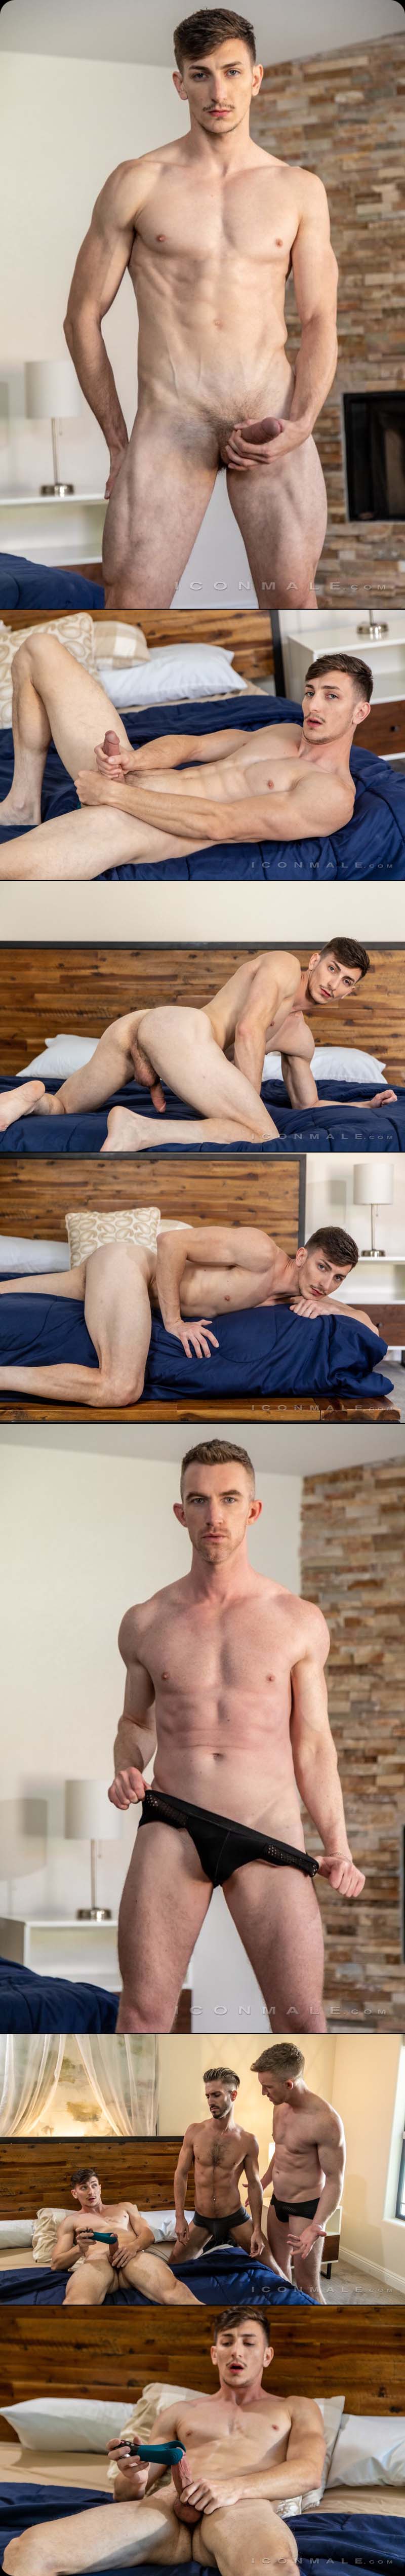 Uncle Randy, Scene 1: The Thirst Is Real (Nick Fitt, Michael Jackman and Ian Frost) at Icon Male